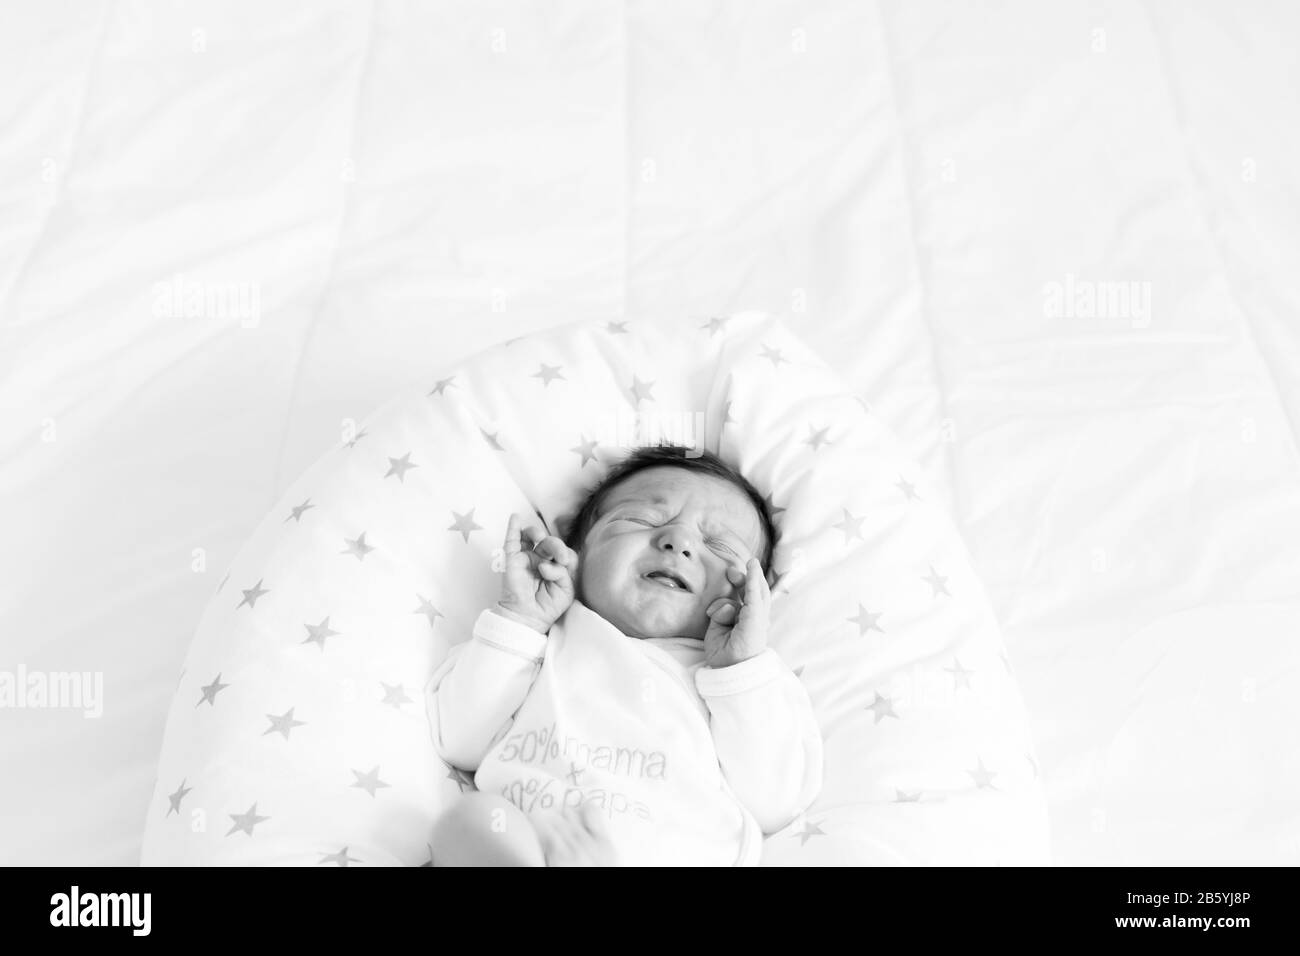 A black and white image of baby crying on a bed Stock Photo